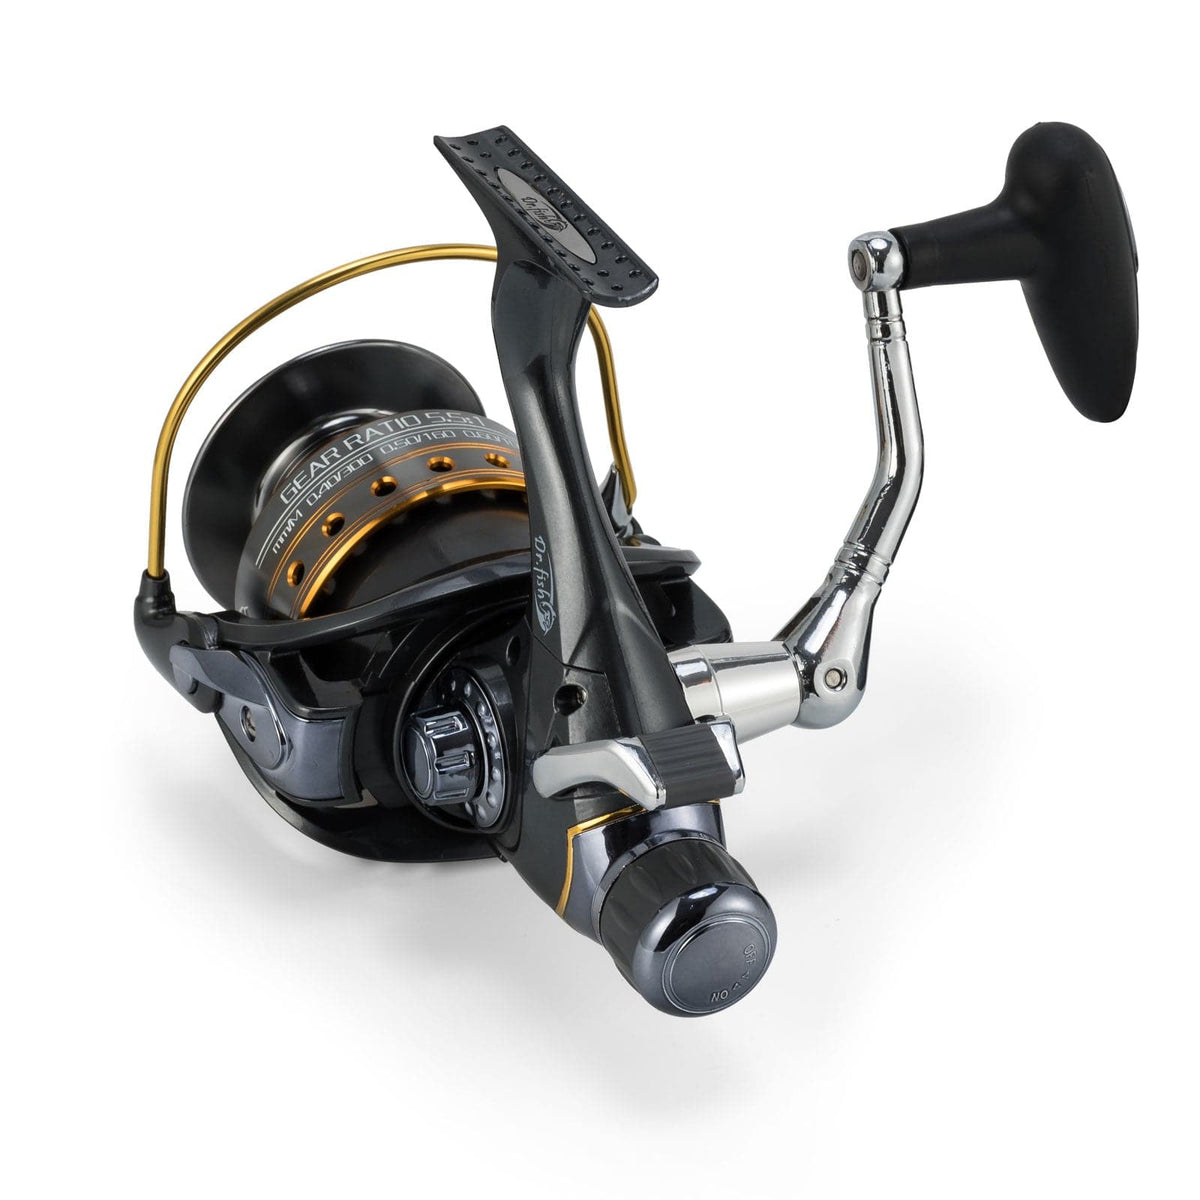 Dr.Fish Baitfeeder Spinning Reel 5.5:1 2 Spools for Saltwater Fishing –  Dr.Fish Tackles